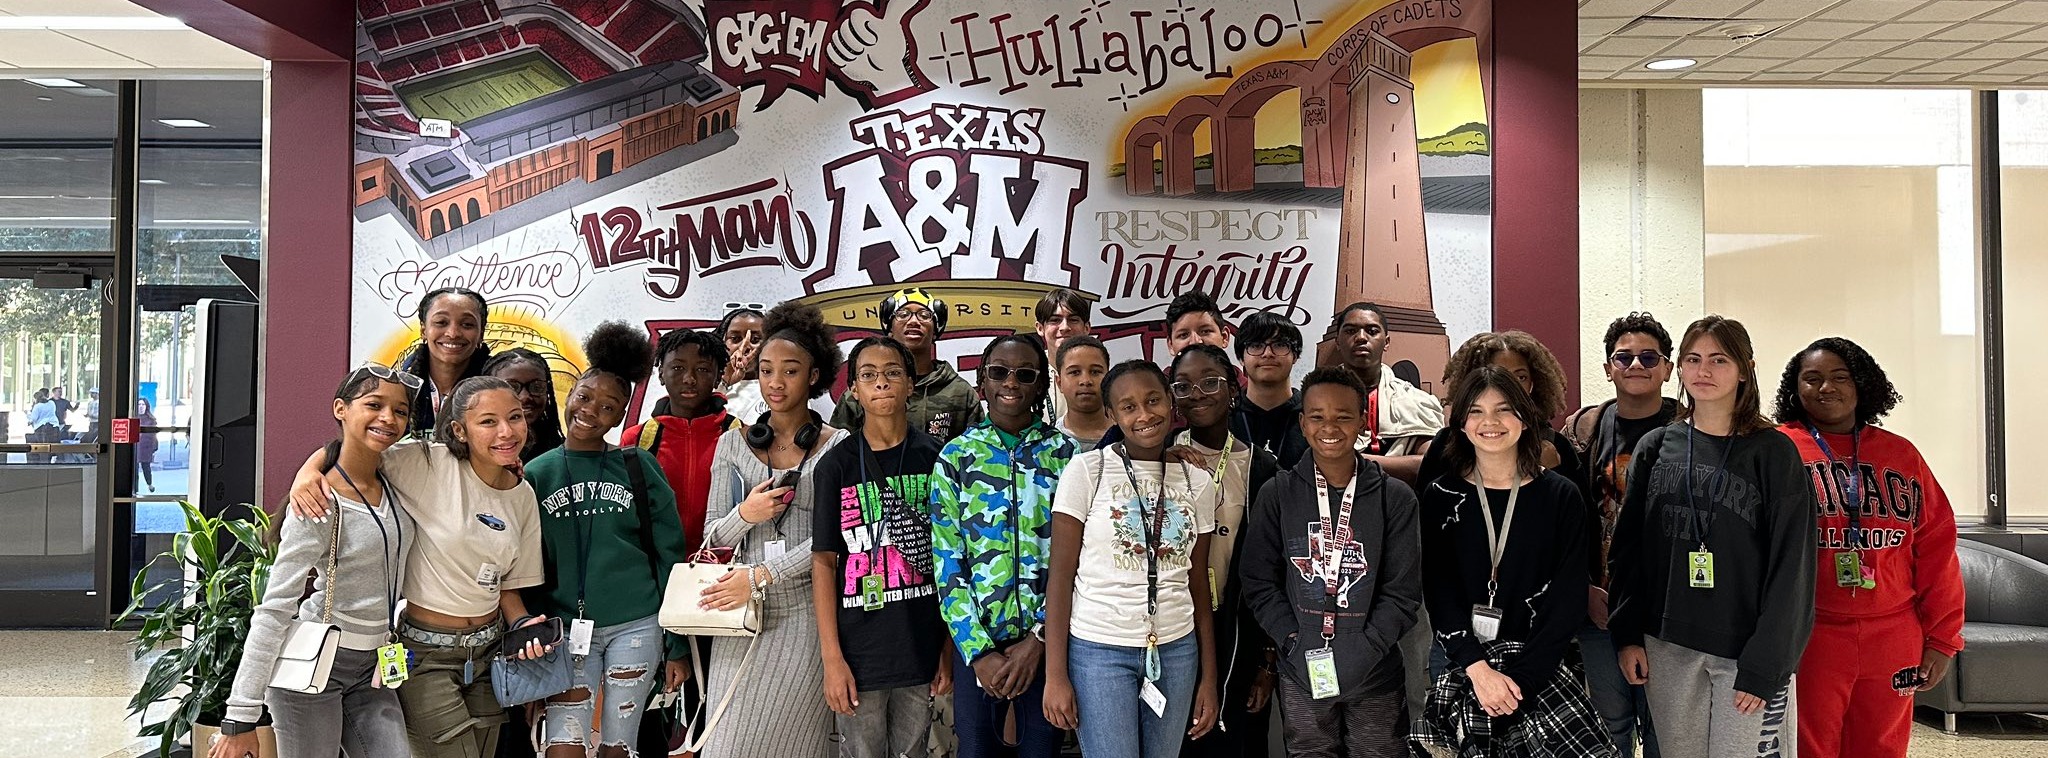 AVID trip to Texas A and M